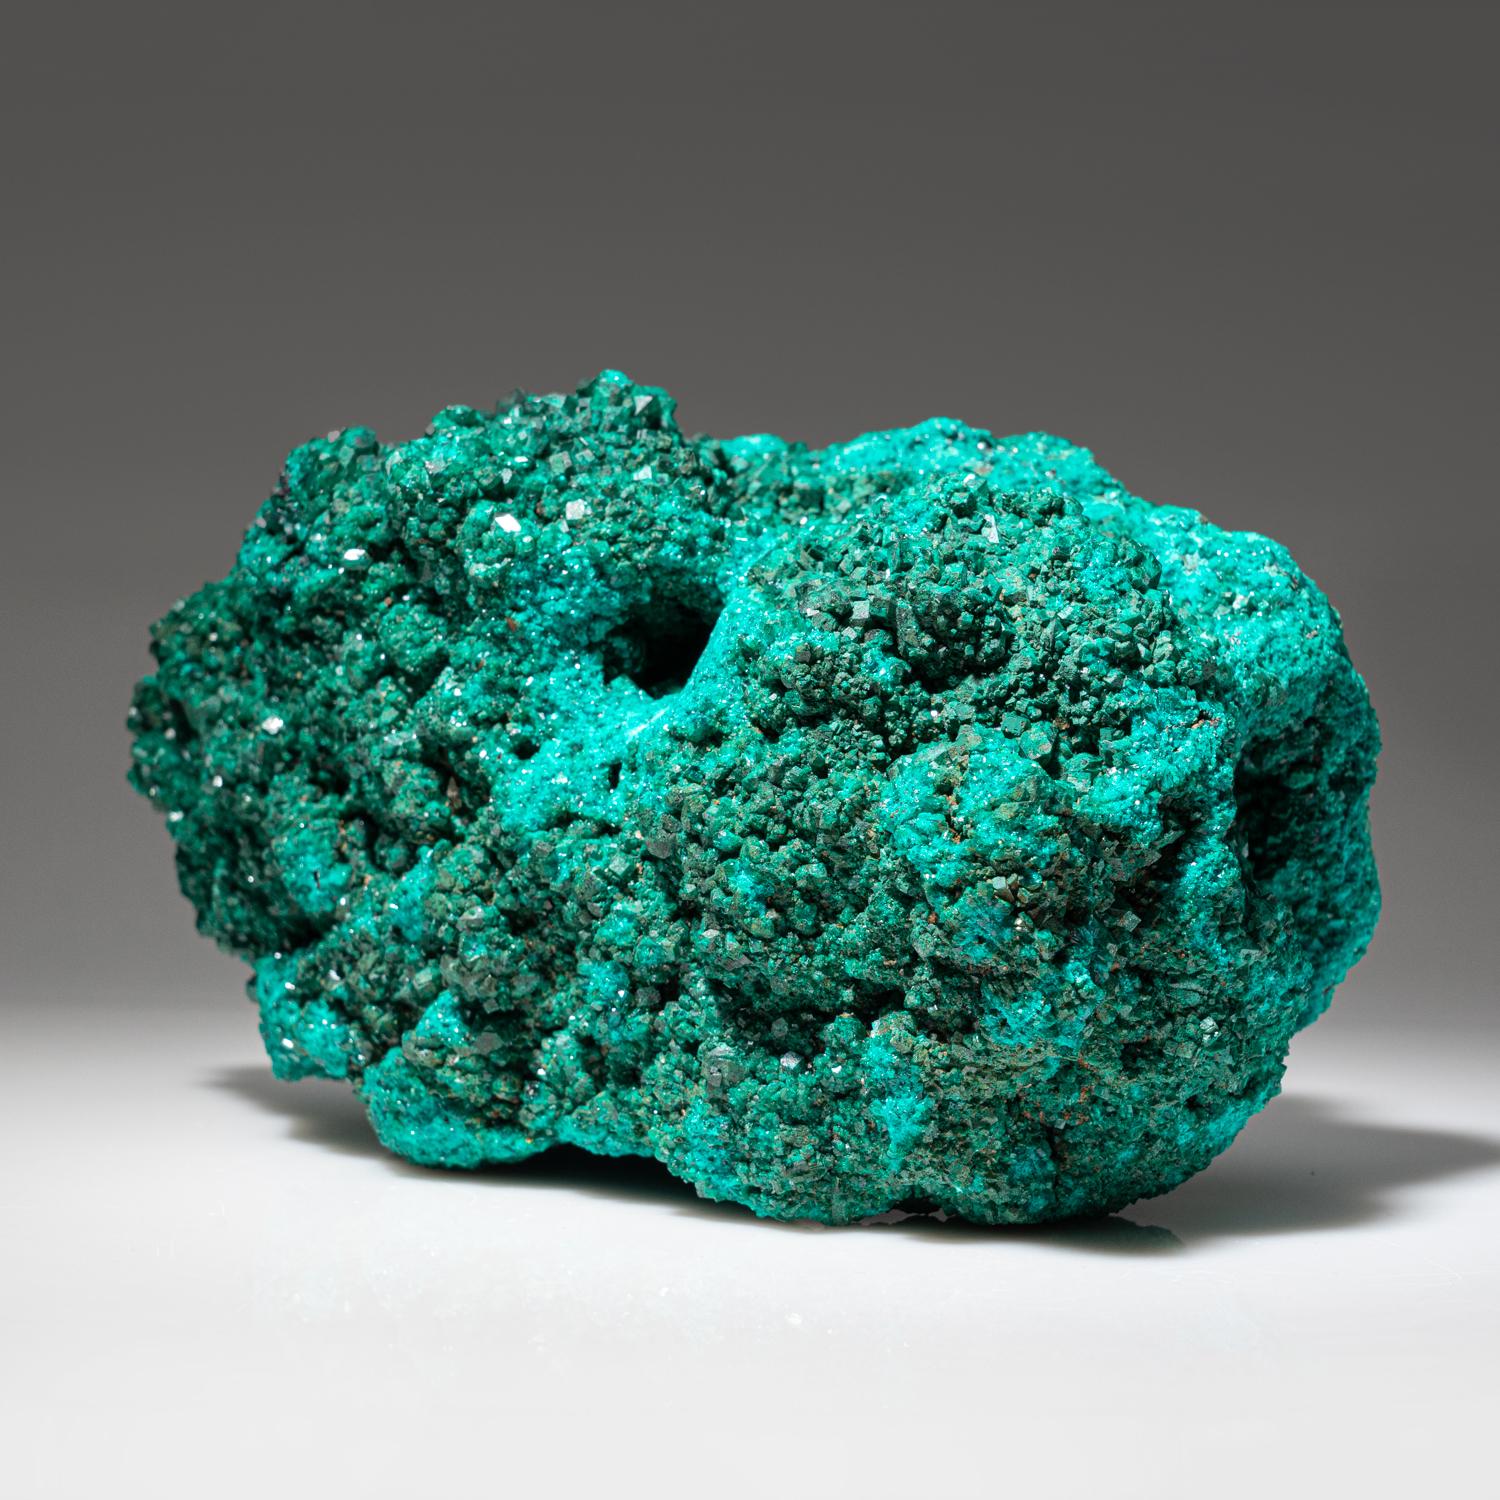 From (Tantara Mine), Katanga (Shaba) Province, Democratic Republic of the Congo

Crystallized mass of deep green dioptase with lustrous crystals lining the concave areas of the cluster. The dioptase crystals look beautiful transparent, vivid green